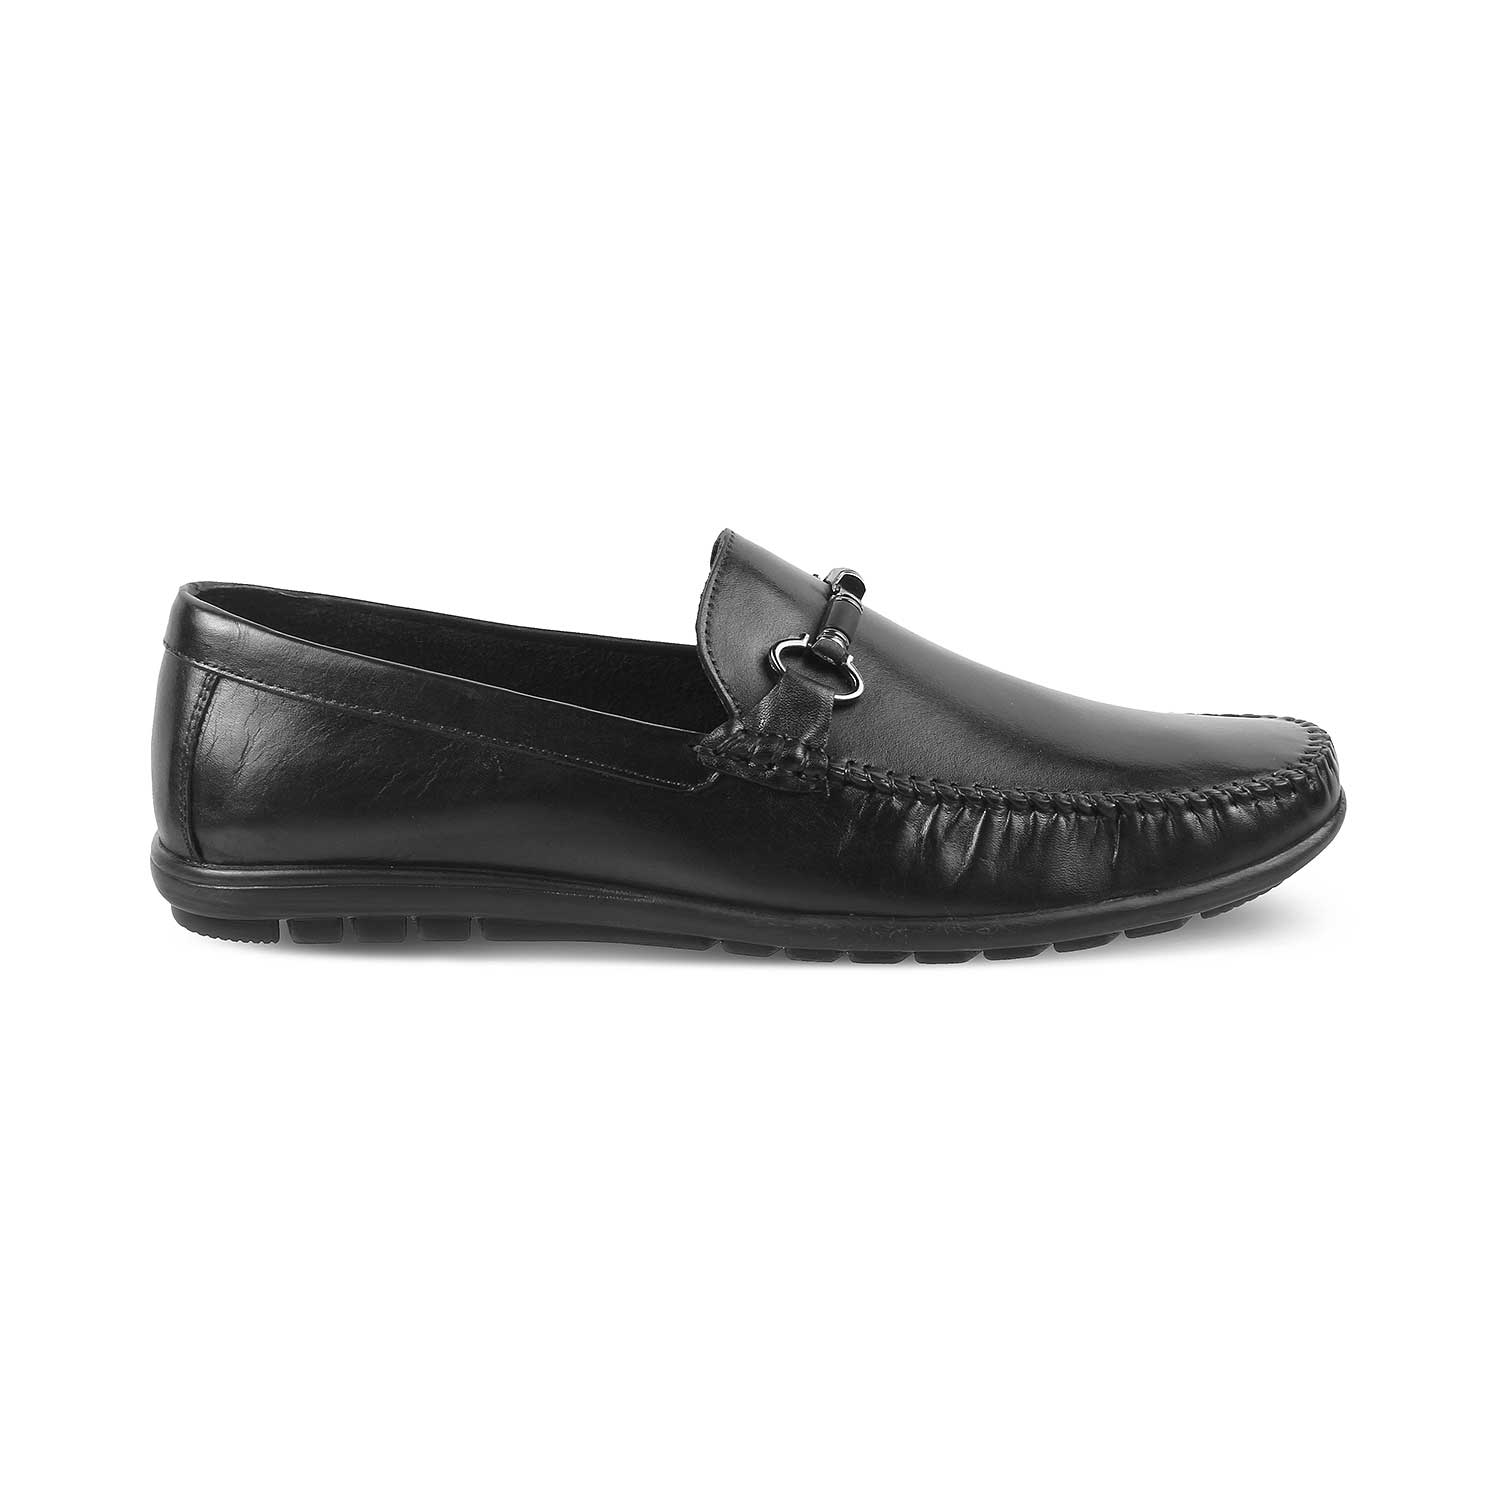 The Freccia Black Men's Leather Driving Loafers Tresmode - Tresmode